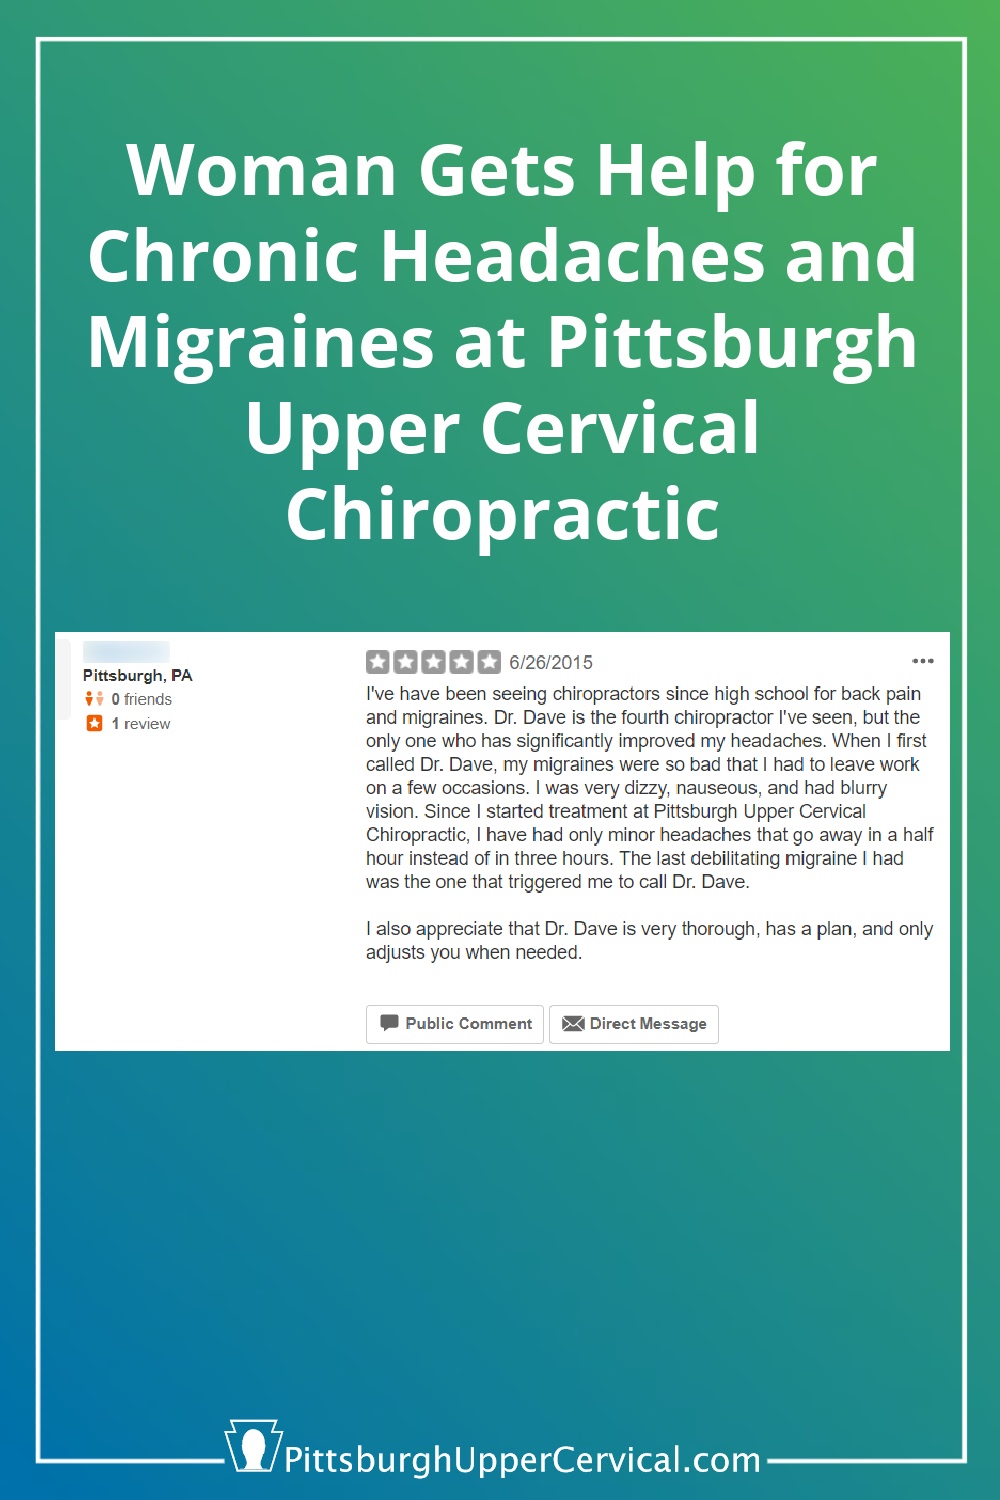 Help for Chronic Headaches and Migraines - Pittsburgh Upper Cervical Chiropractic - Pinterest Pin